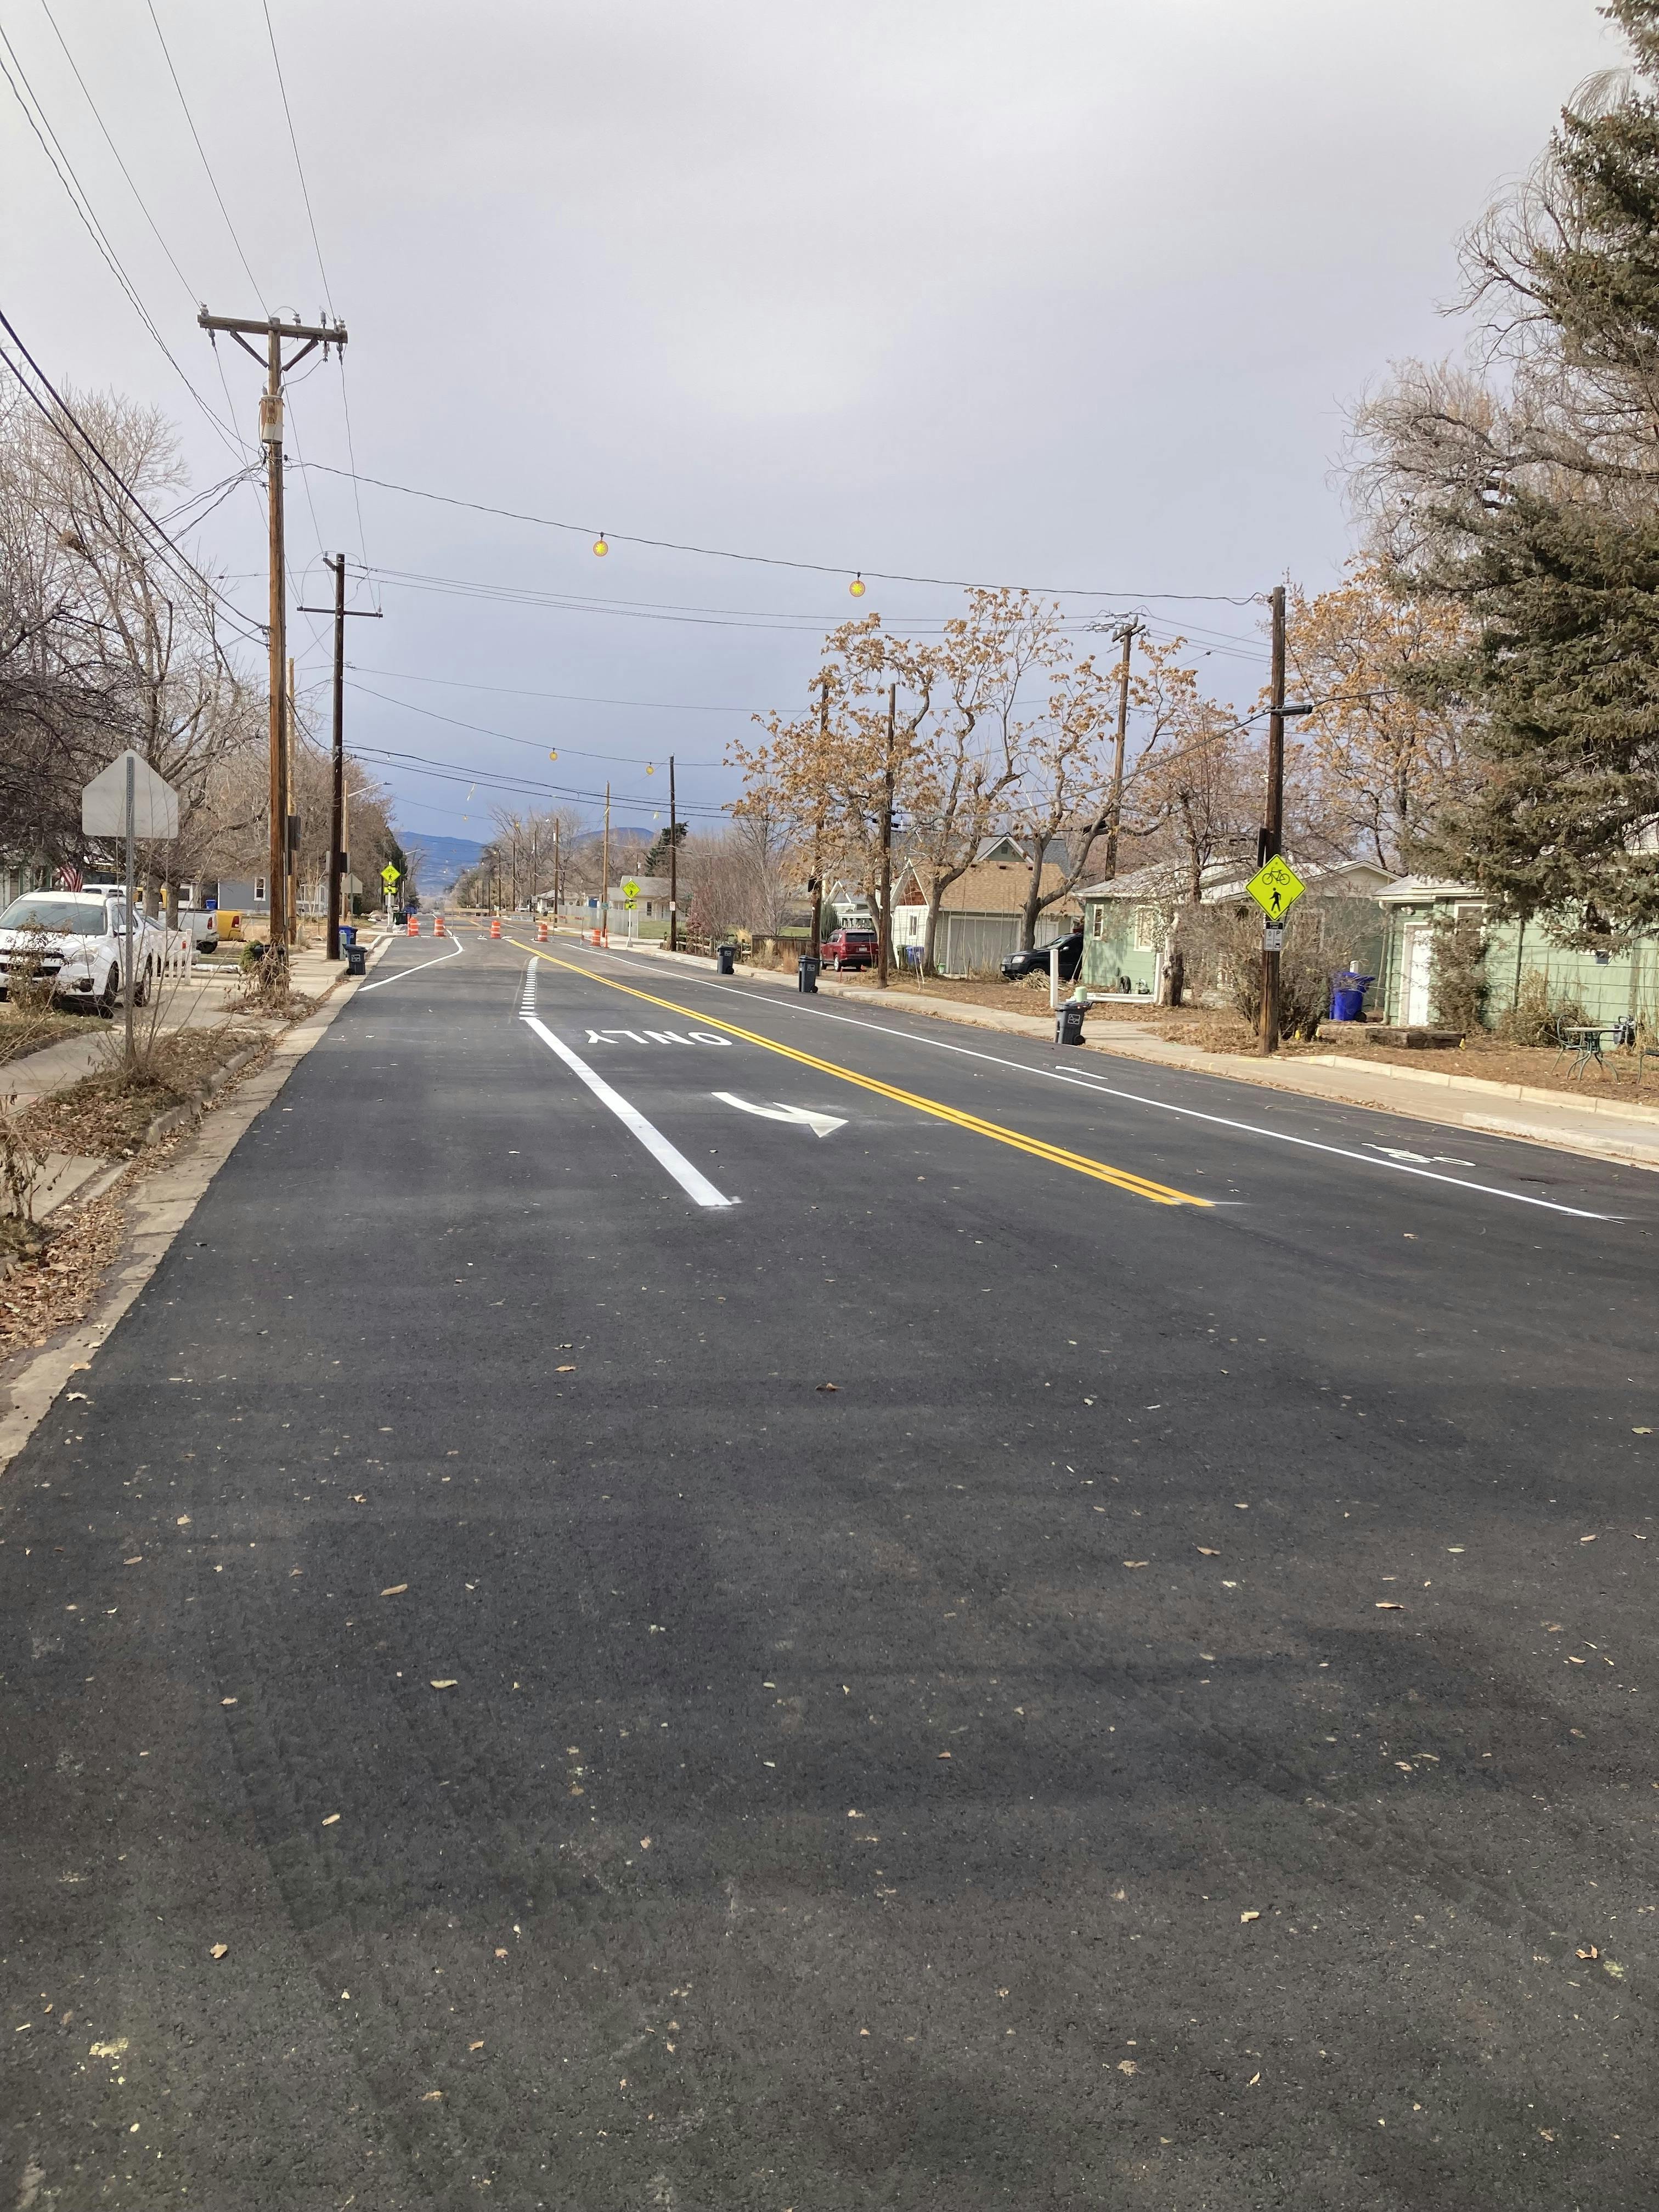 November 2022 - New asphalt and painted lines at Garfield Avenue and W. 1st Street